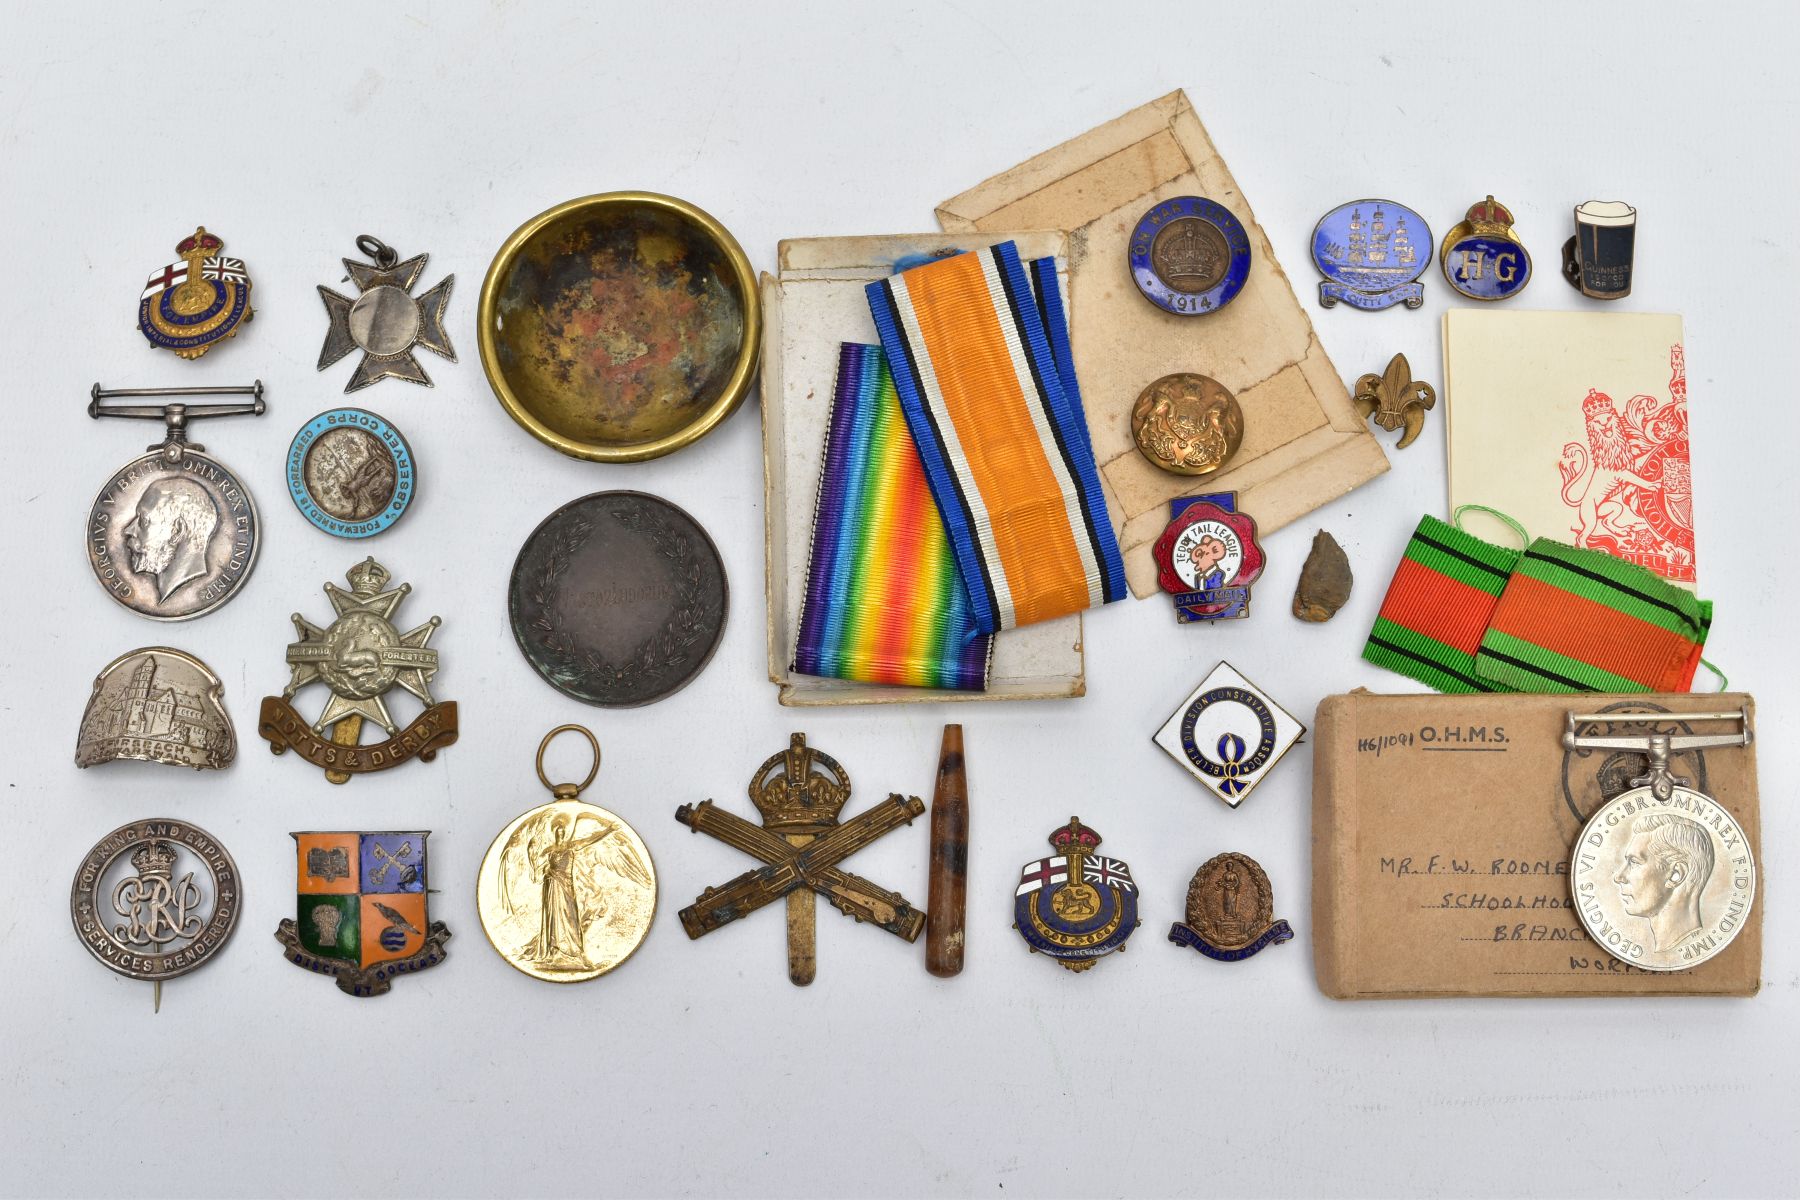 A BOX CONTAINING A BRITISH WAR & VICTORY MEDAL PAIR, with flattened box of issue named Pte 66419